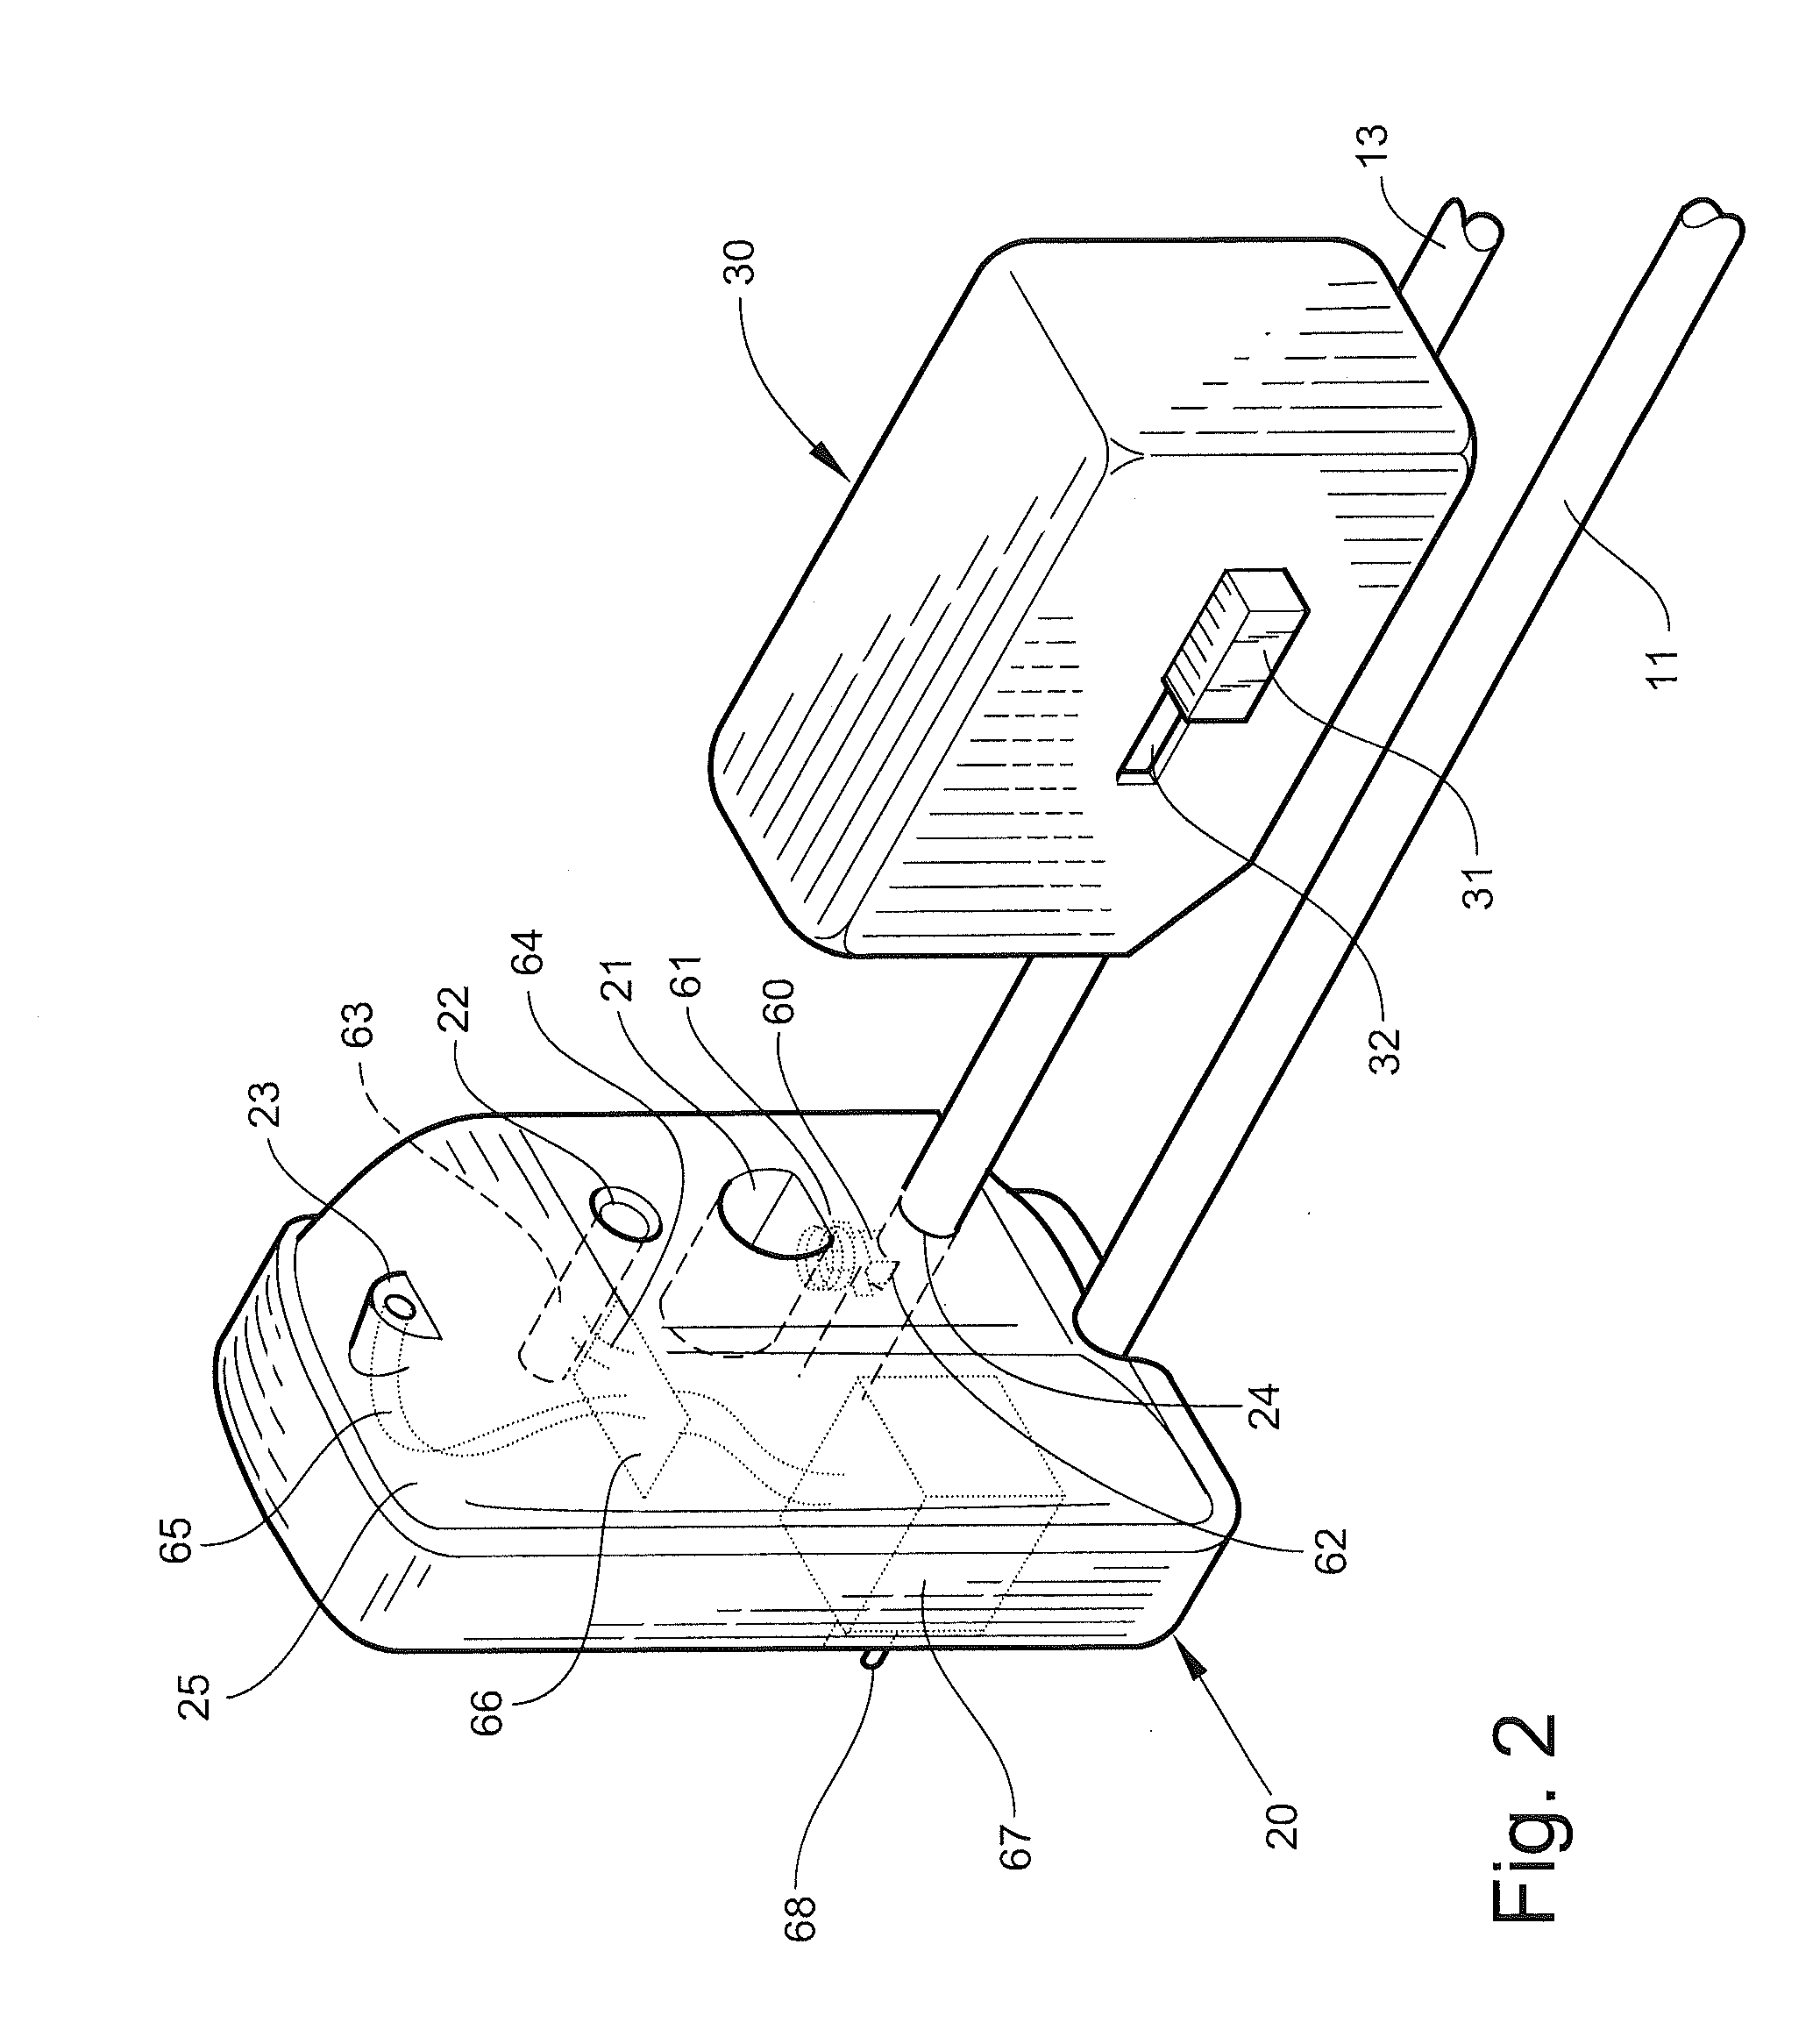 Combination non-programmable and programmable key for security device